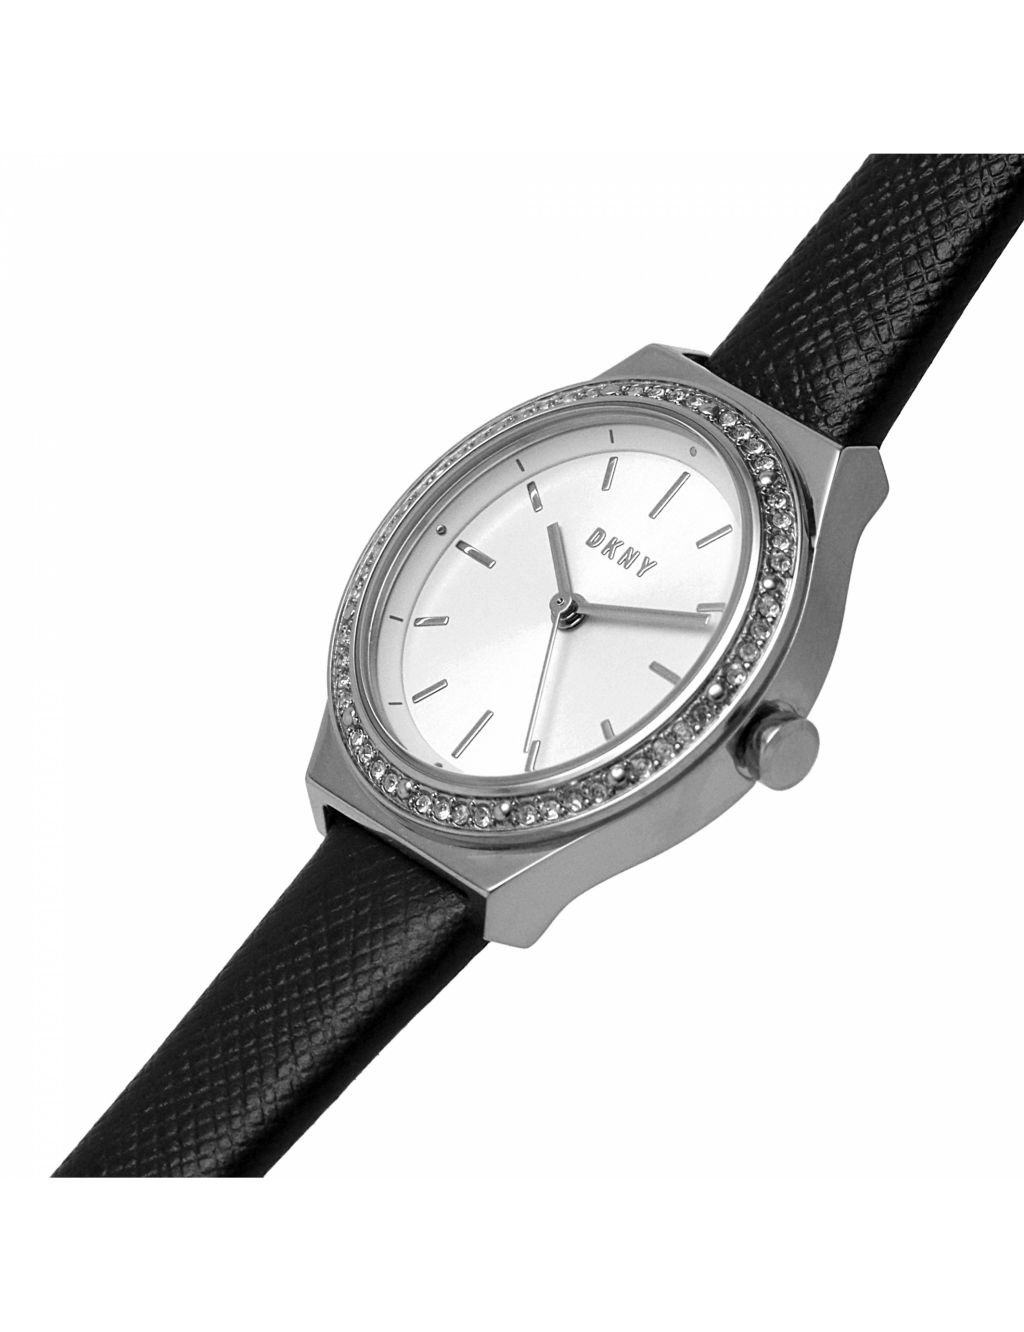 DKNY Parsons Black Leather Watch image 4